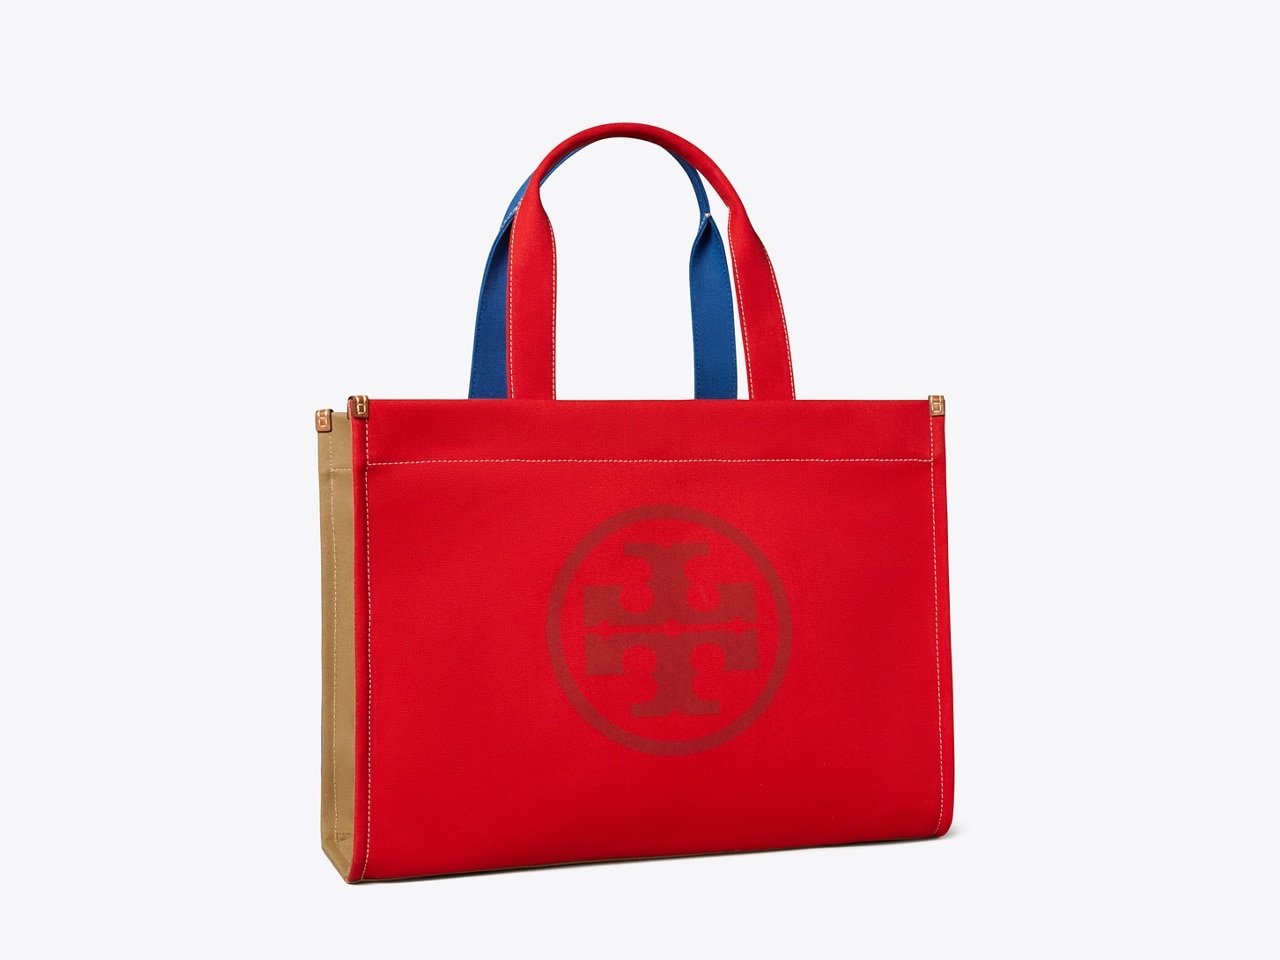 TORY BURCH Teal Blue Color Block Canvas Tote